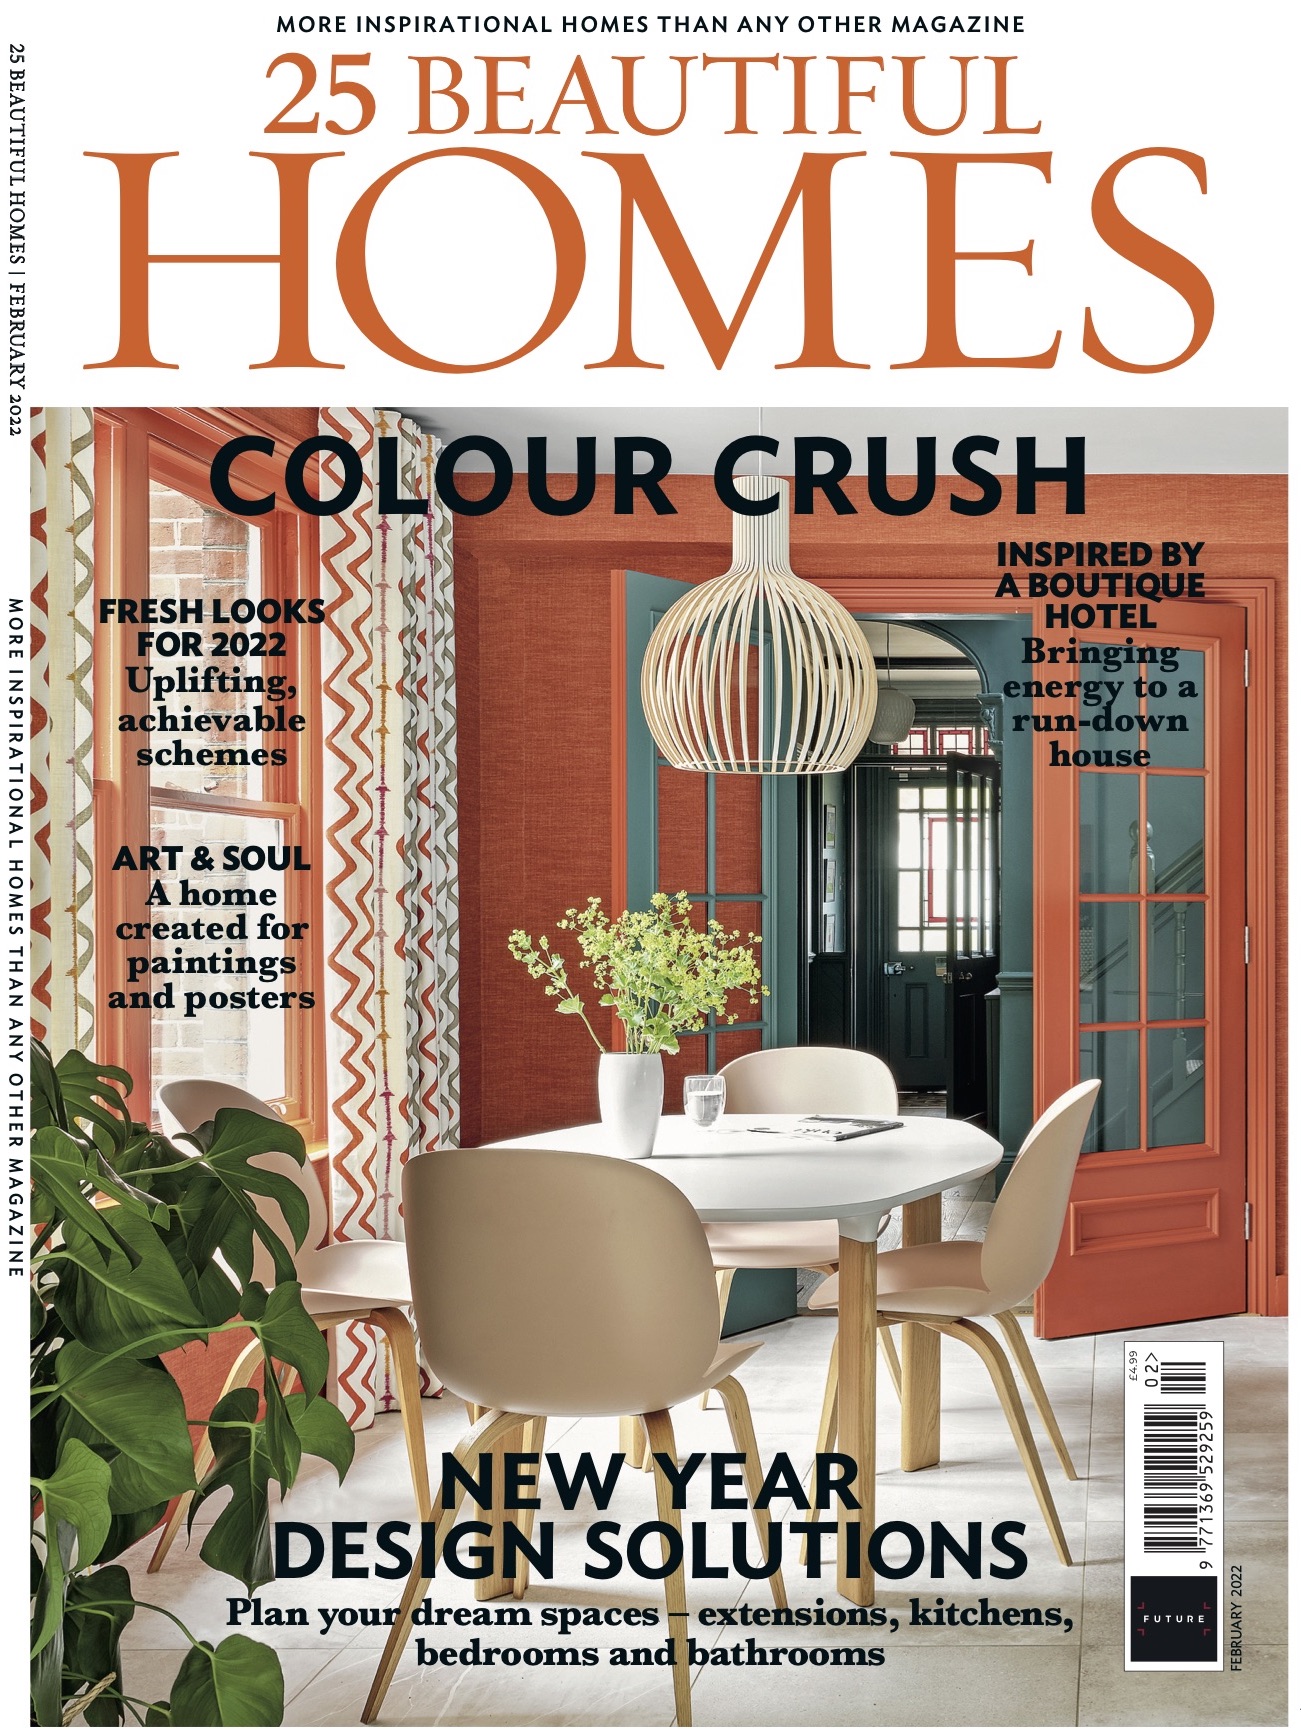 Project in Engelse tijdschrift 25 Beautiful Homes